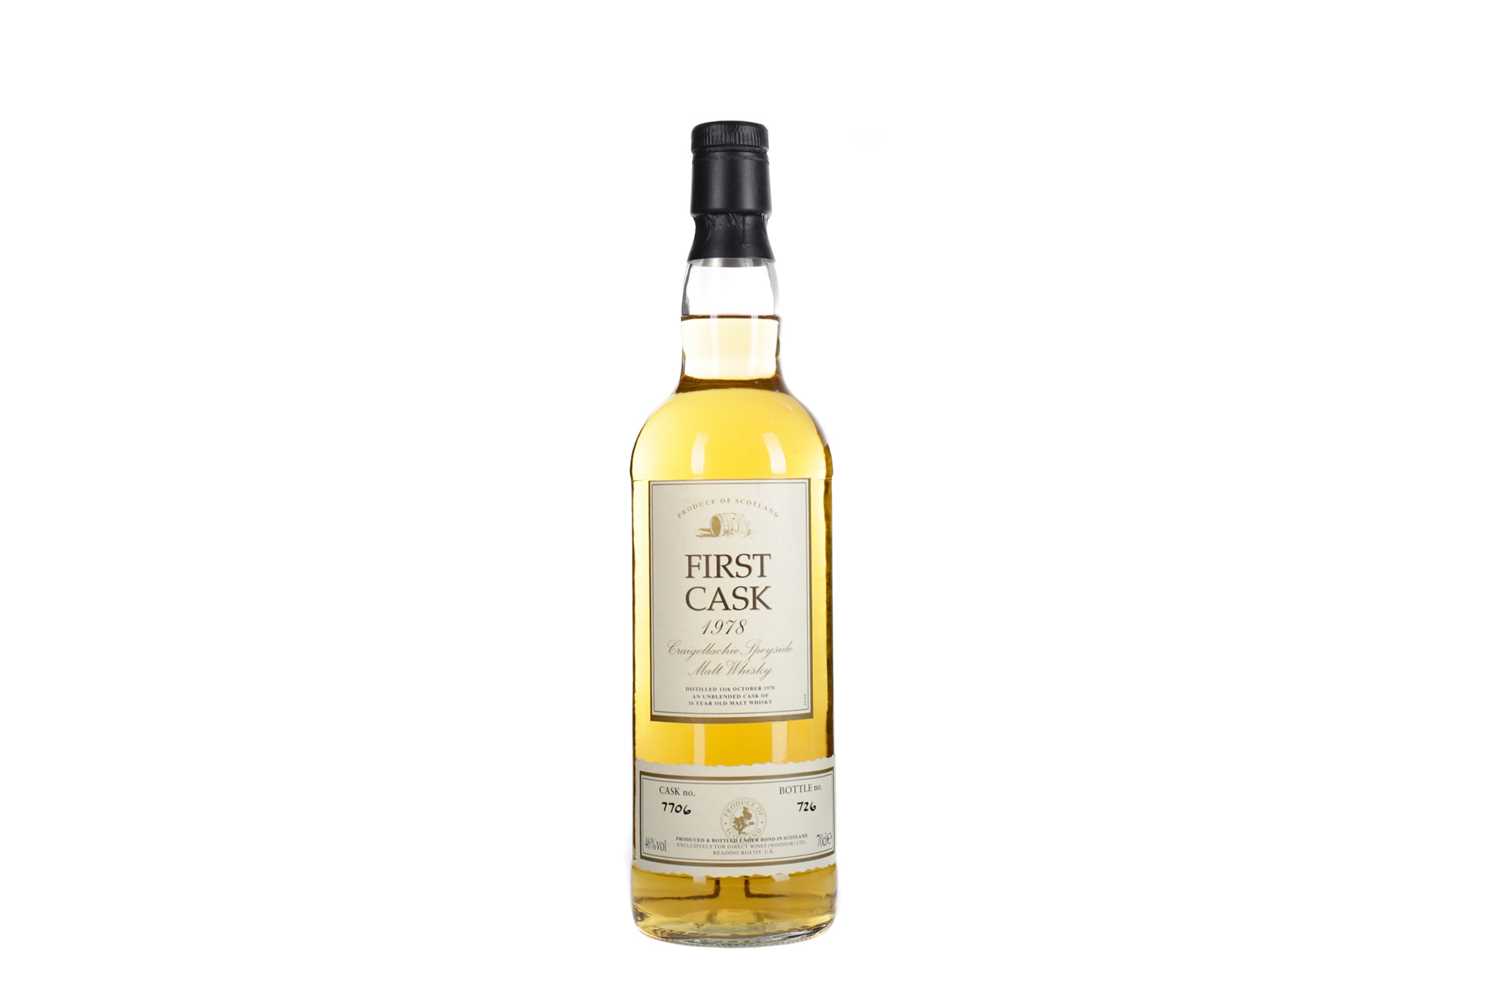 Lot 71 - CRAIGELLACHIE 1978 FIRST CASK AGED 16 YEARS